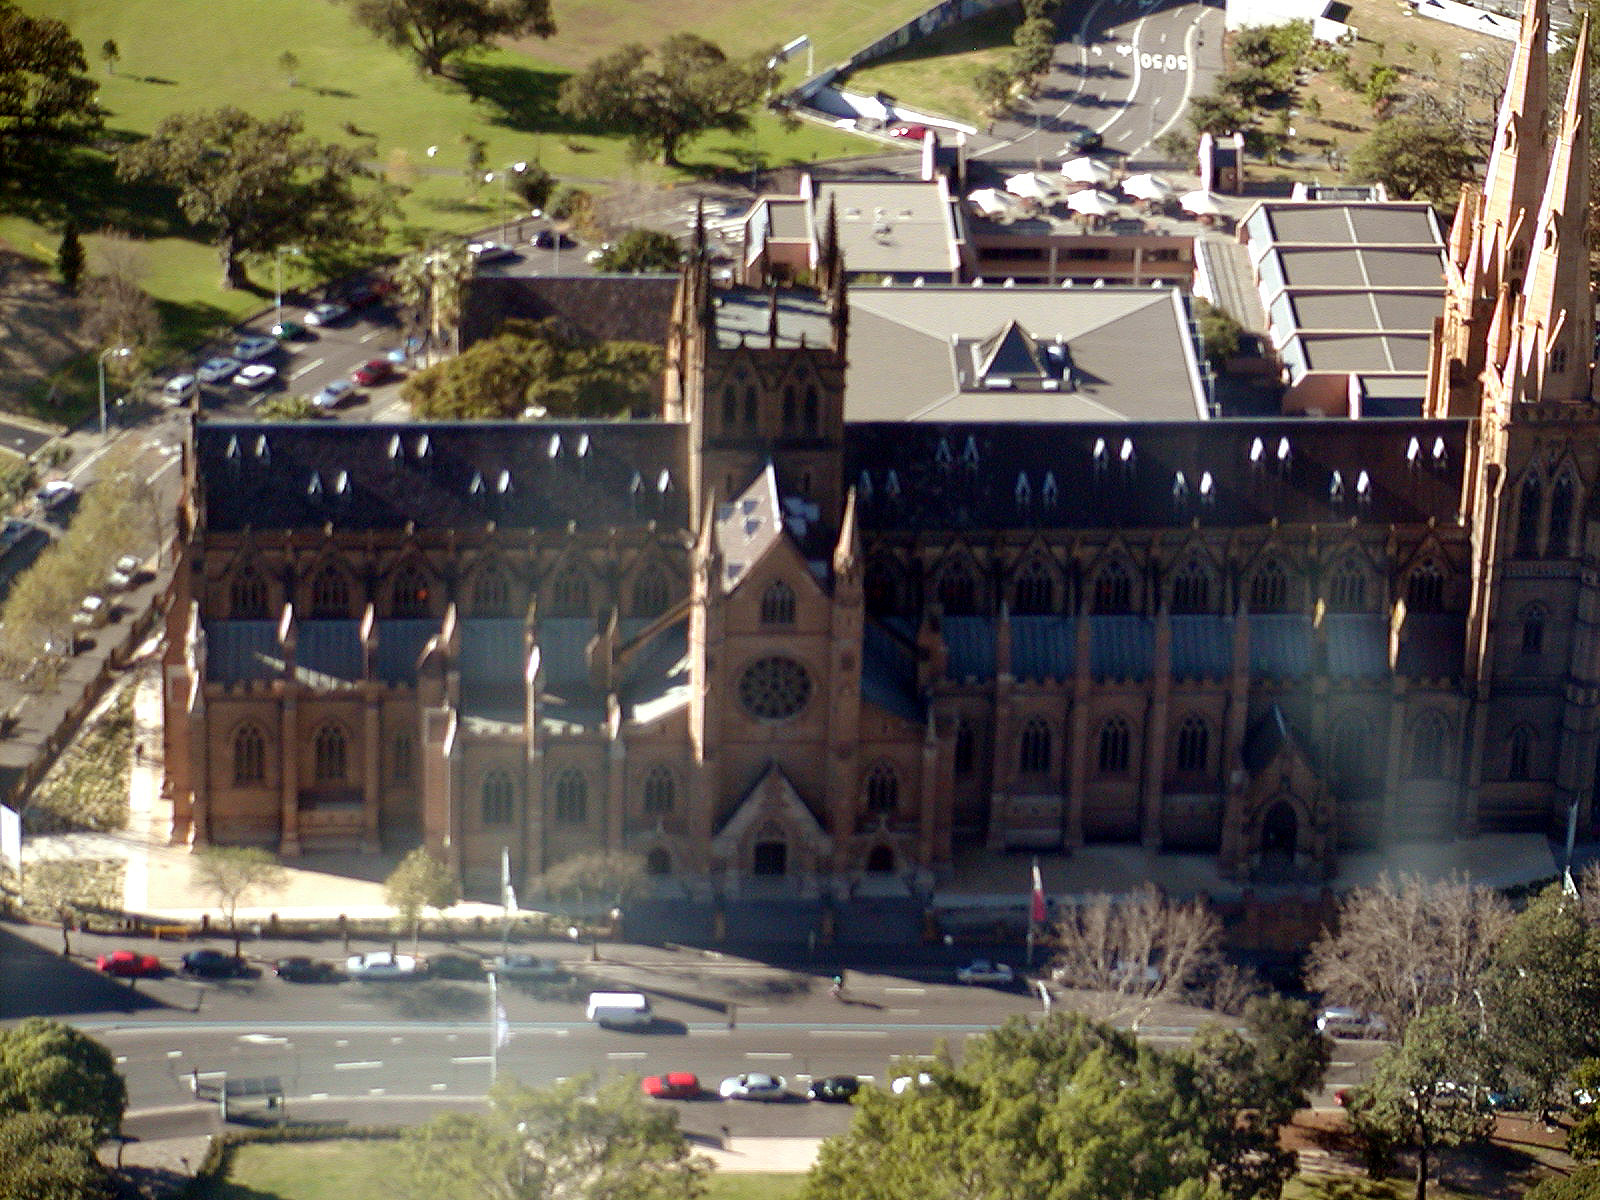 20-Jun-2001 10:18 - Sydney - St. Mary's Cathedral